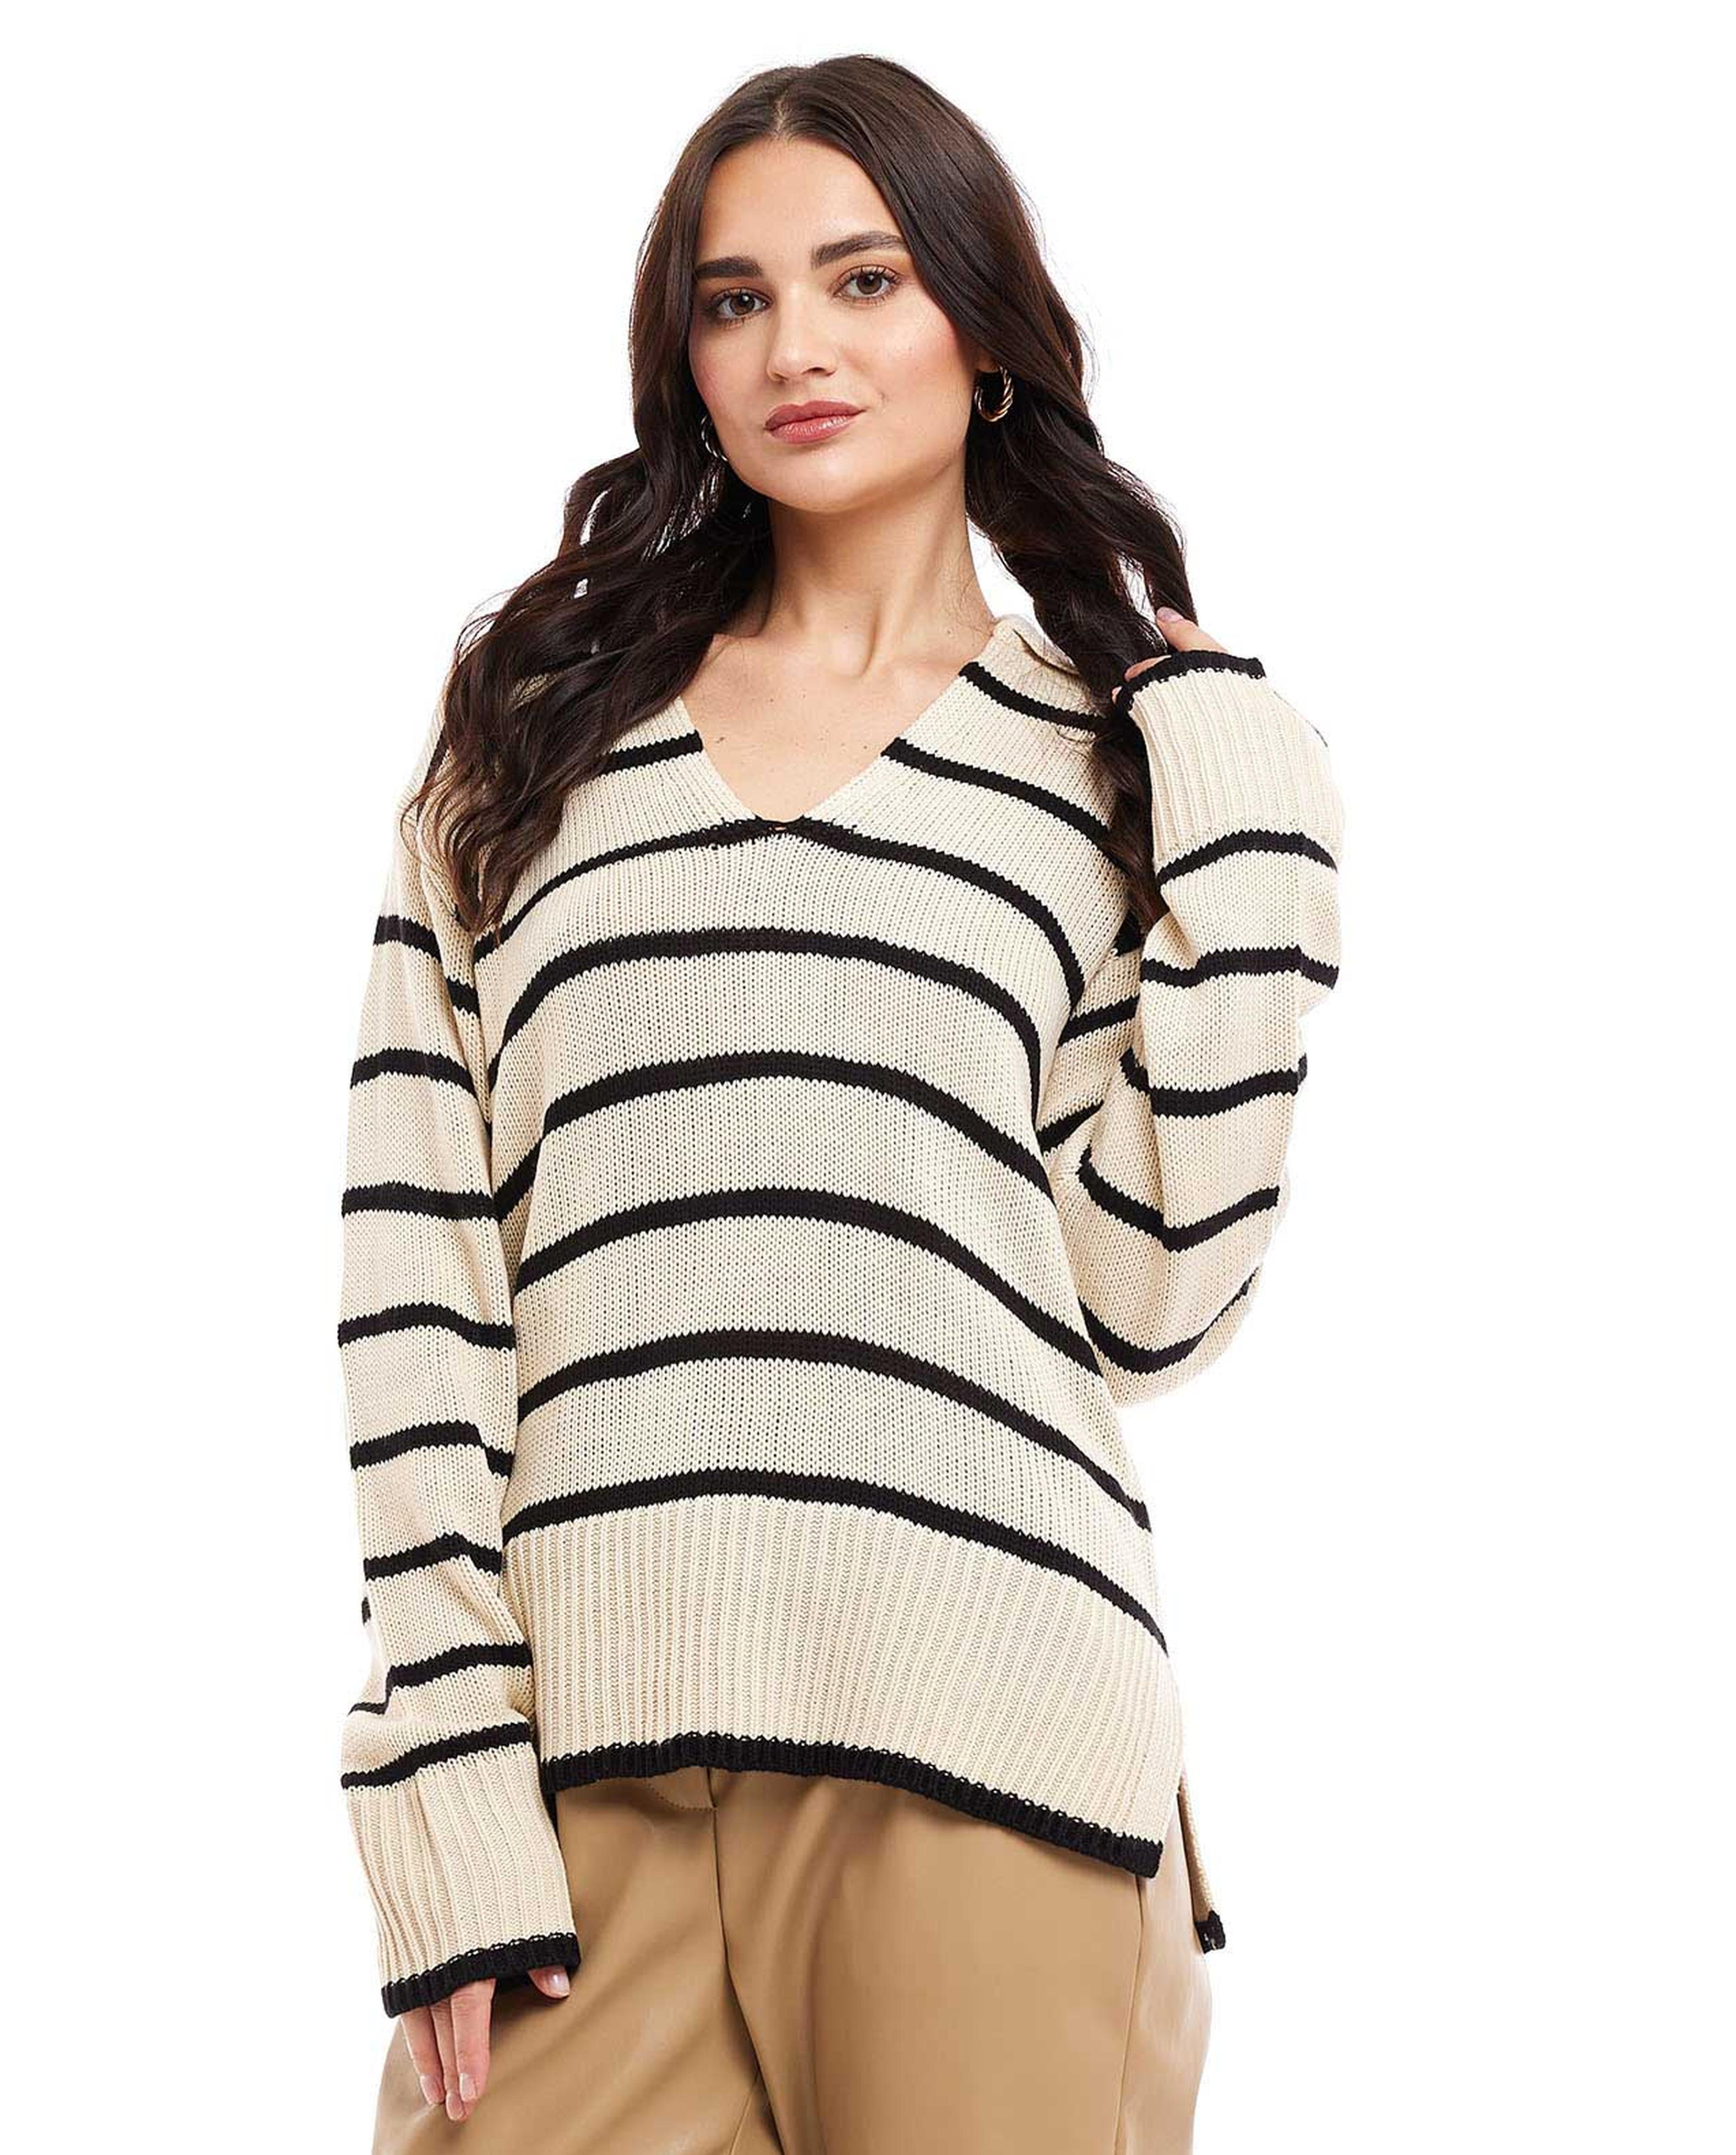 Striped Cardigan with Collared Neck and Long Sleeves